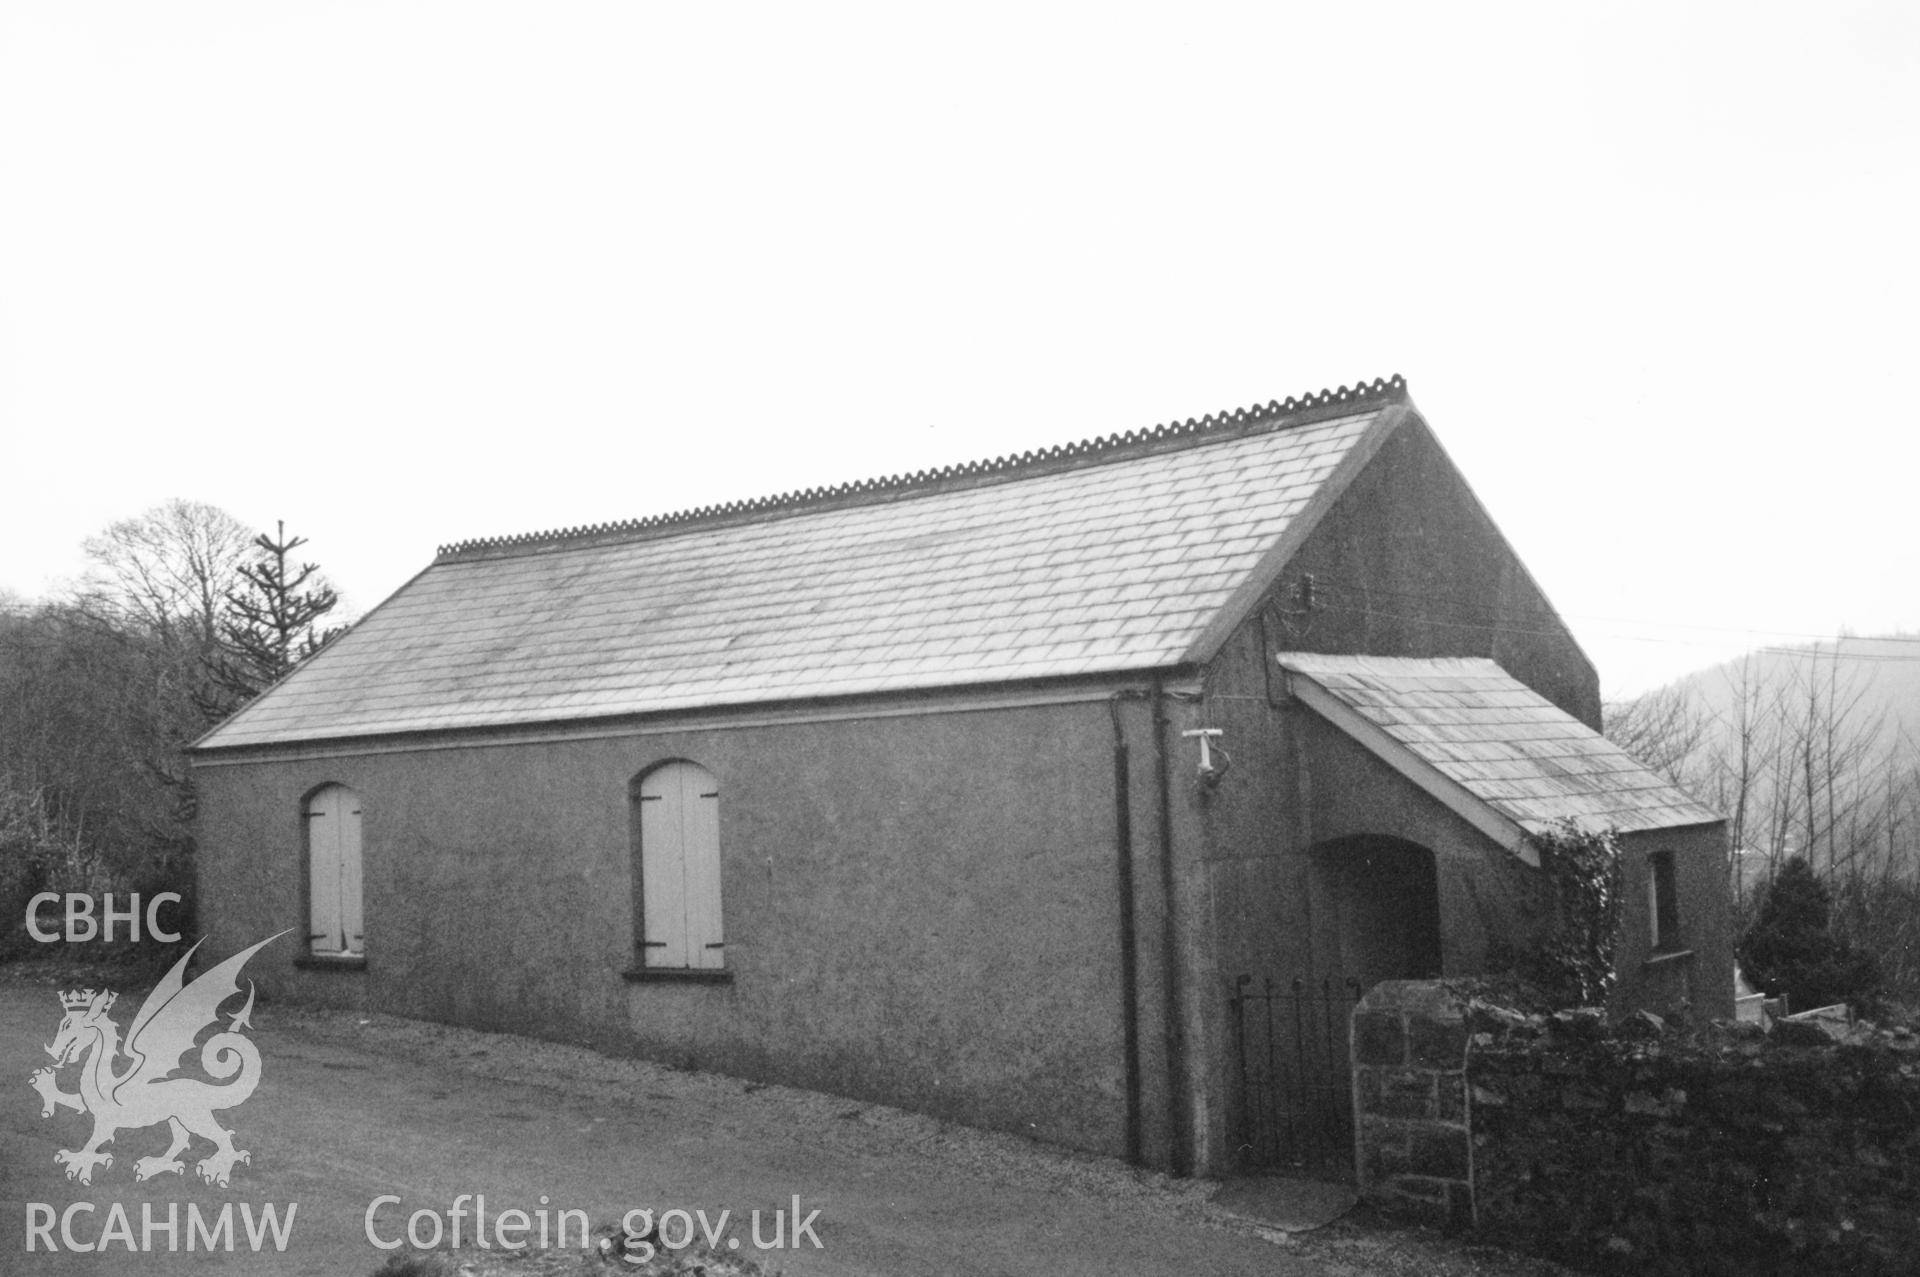 Digital copy of a black and white photograph showing exterior view of Elim Congregational Sunday School, Stepaside, taken by Robert Scourfield, 1996.